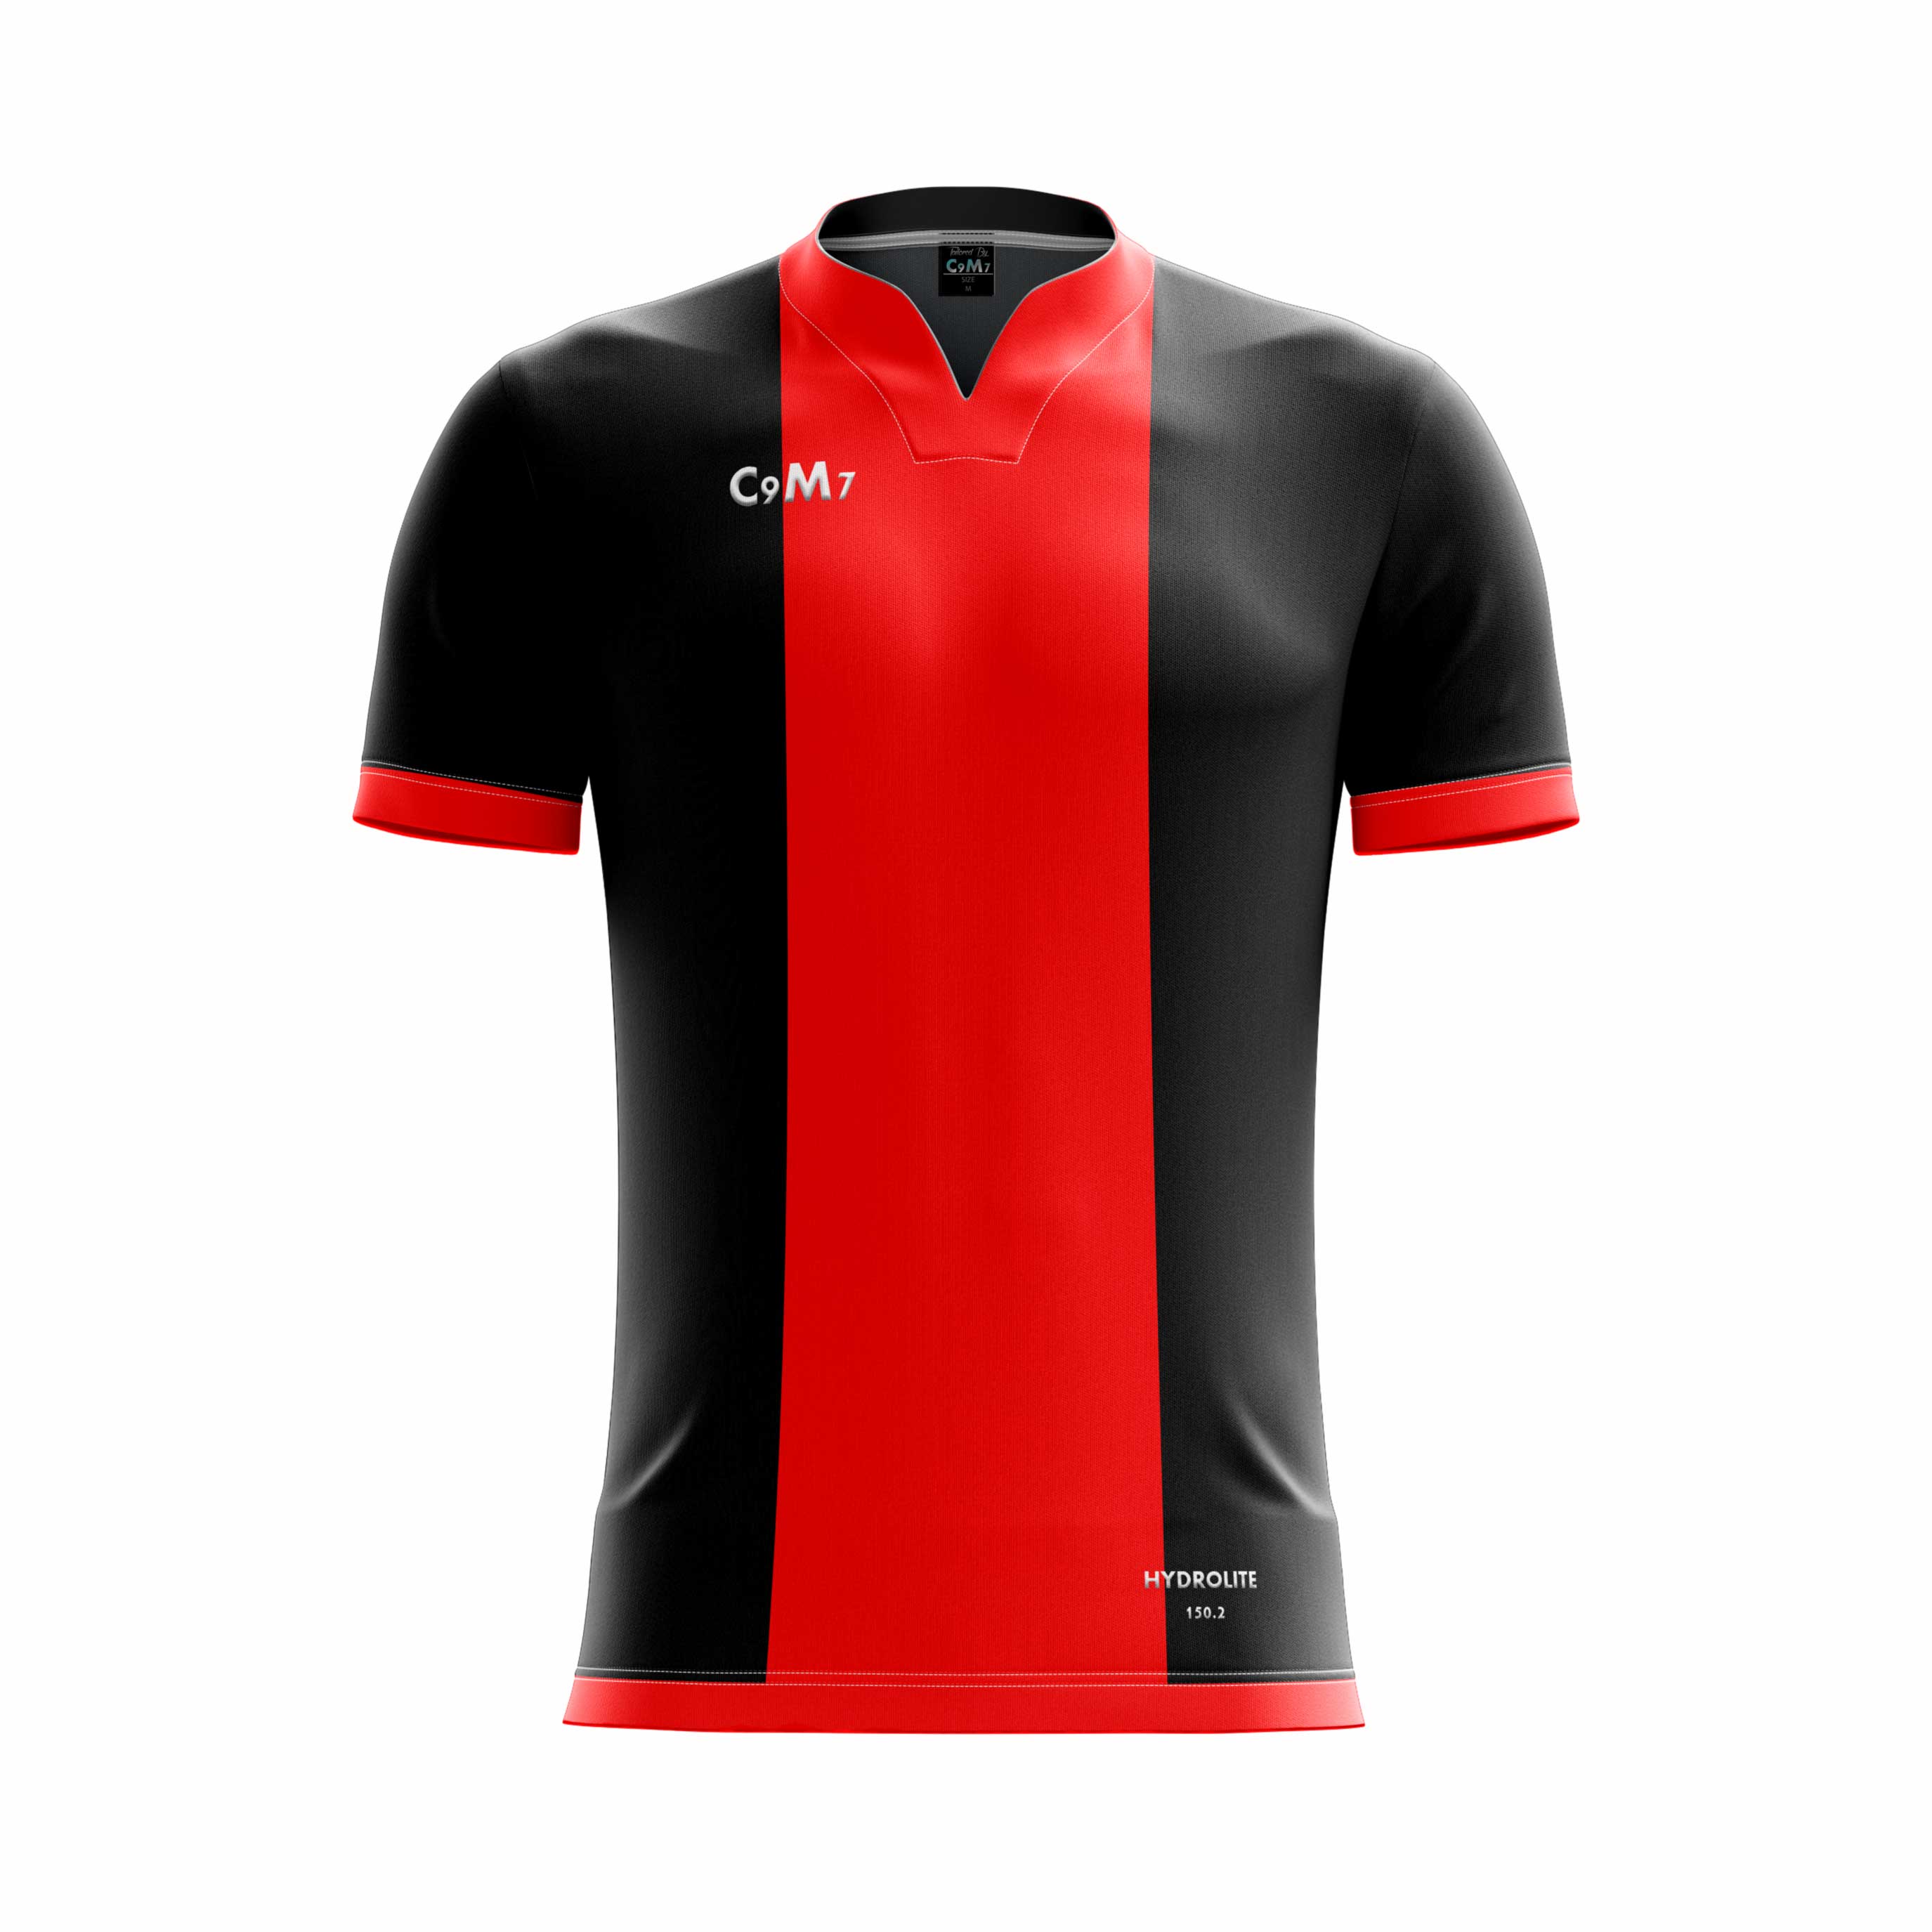 football jersey design red and black